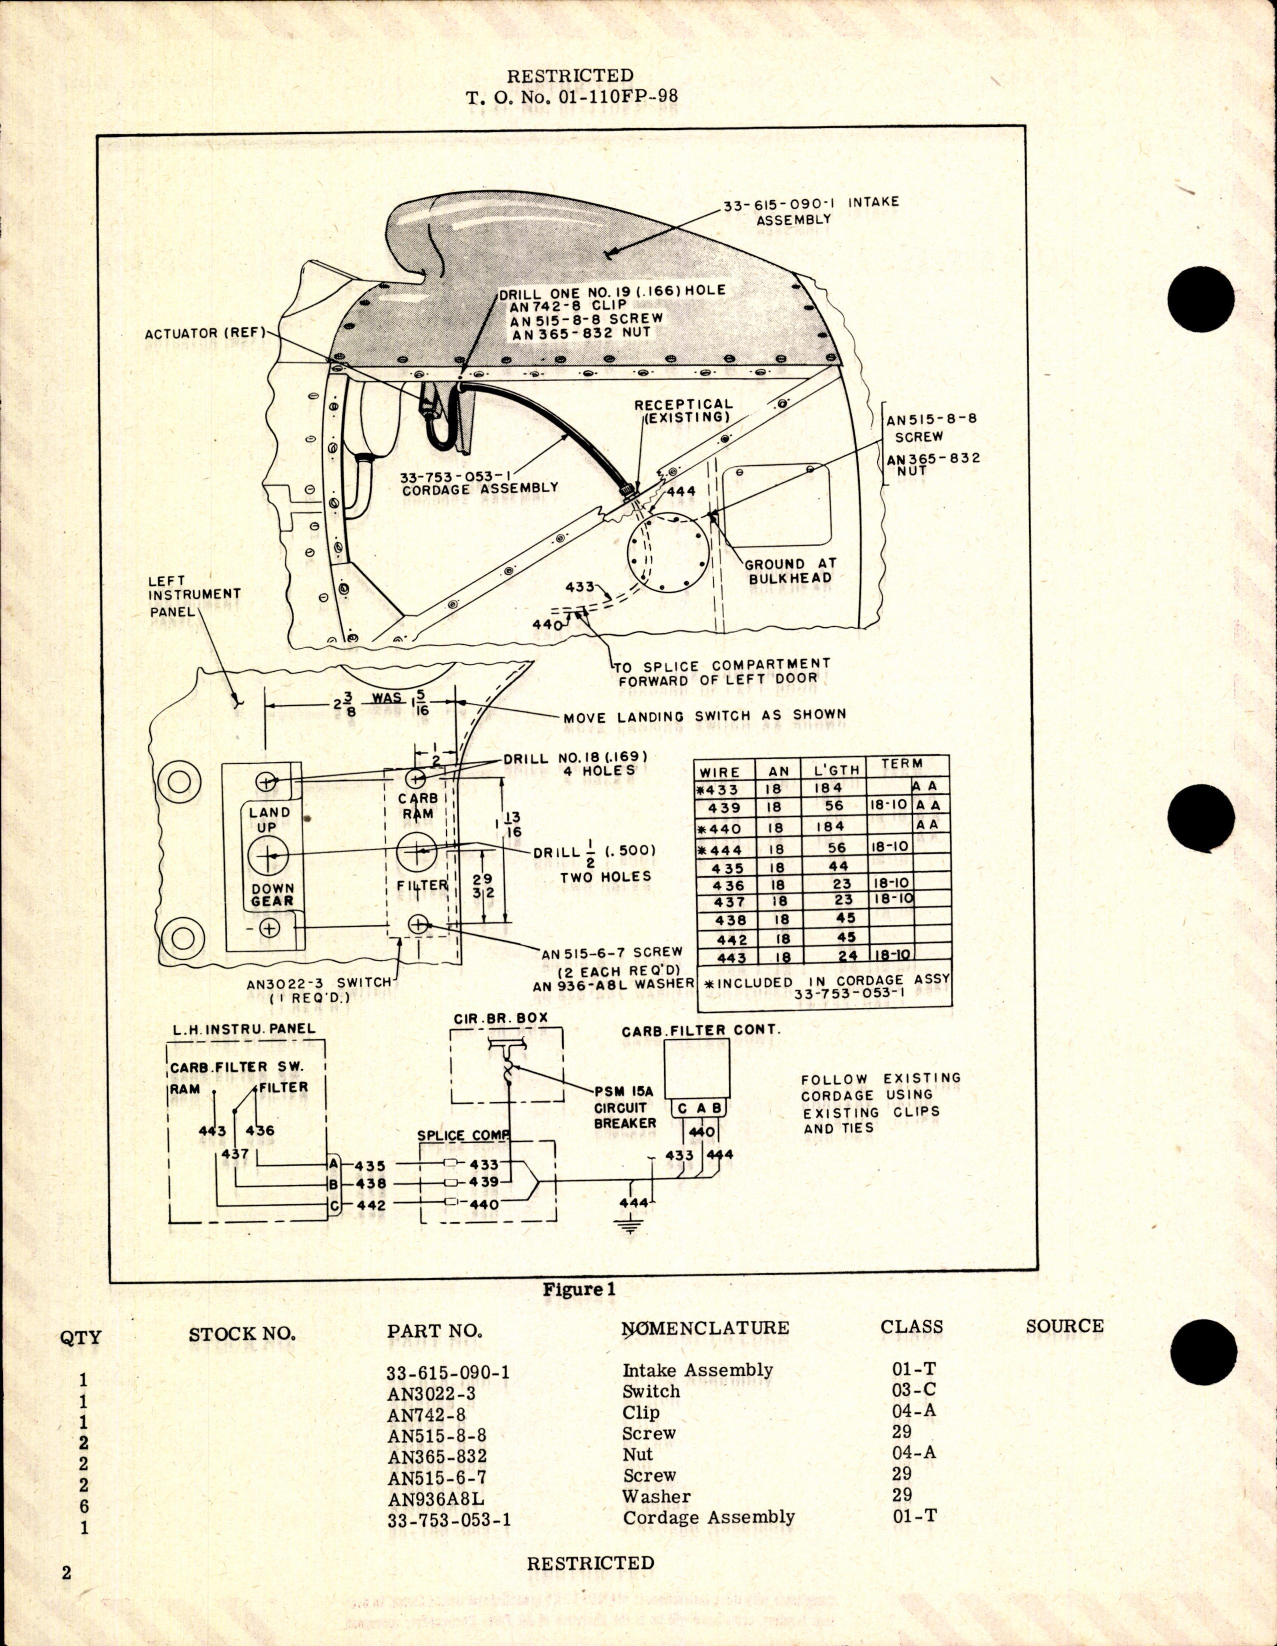 Sample page 2 from AirCorps Library document: Replacement of Carburetor Air Intake Assembly